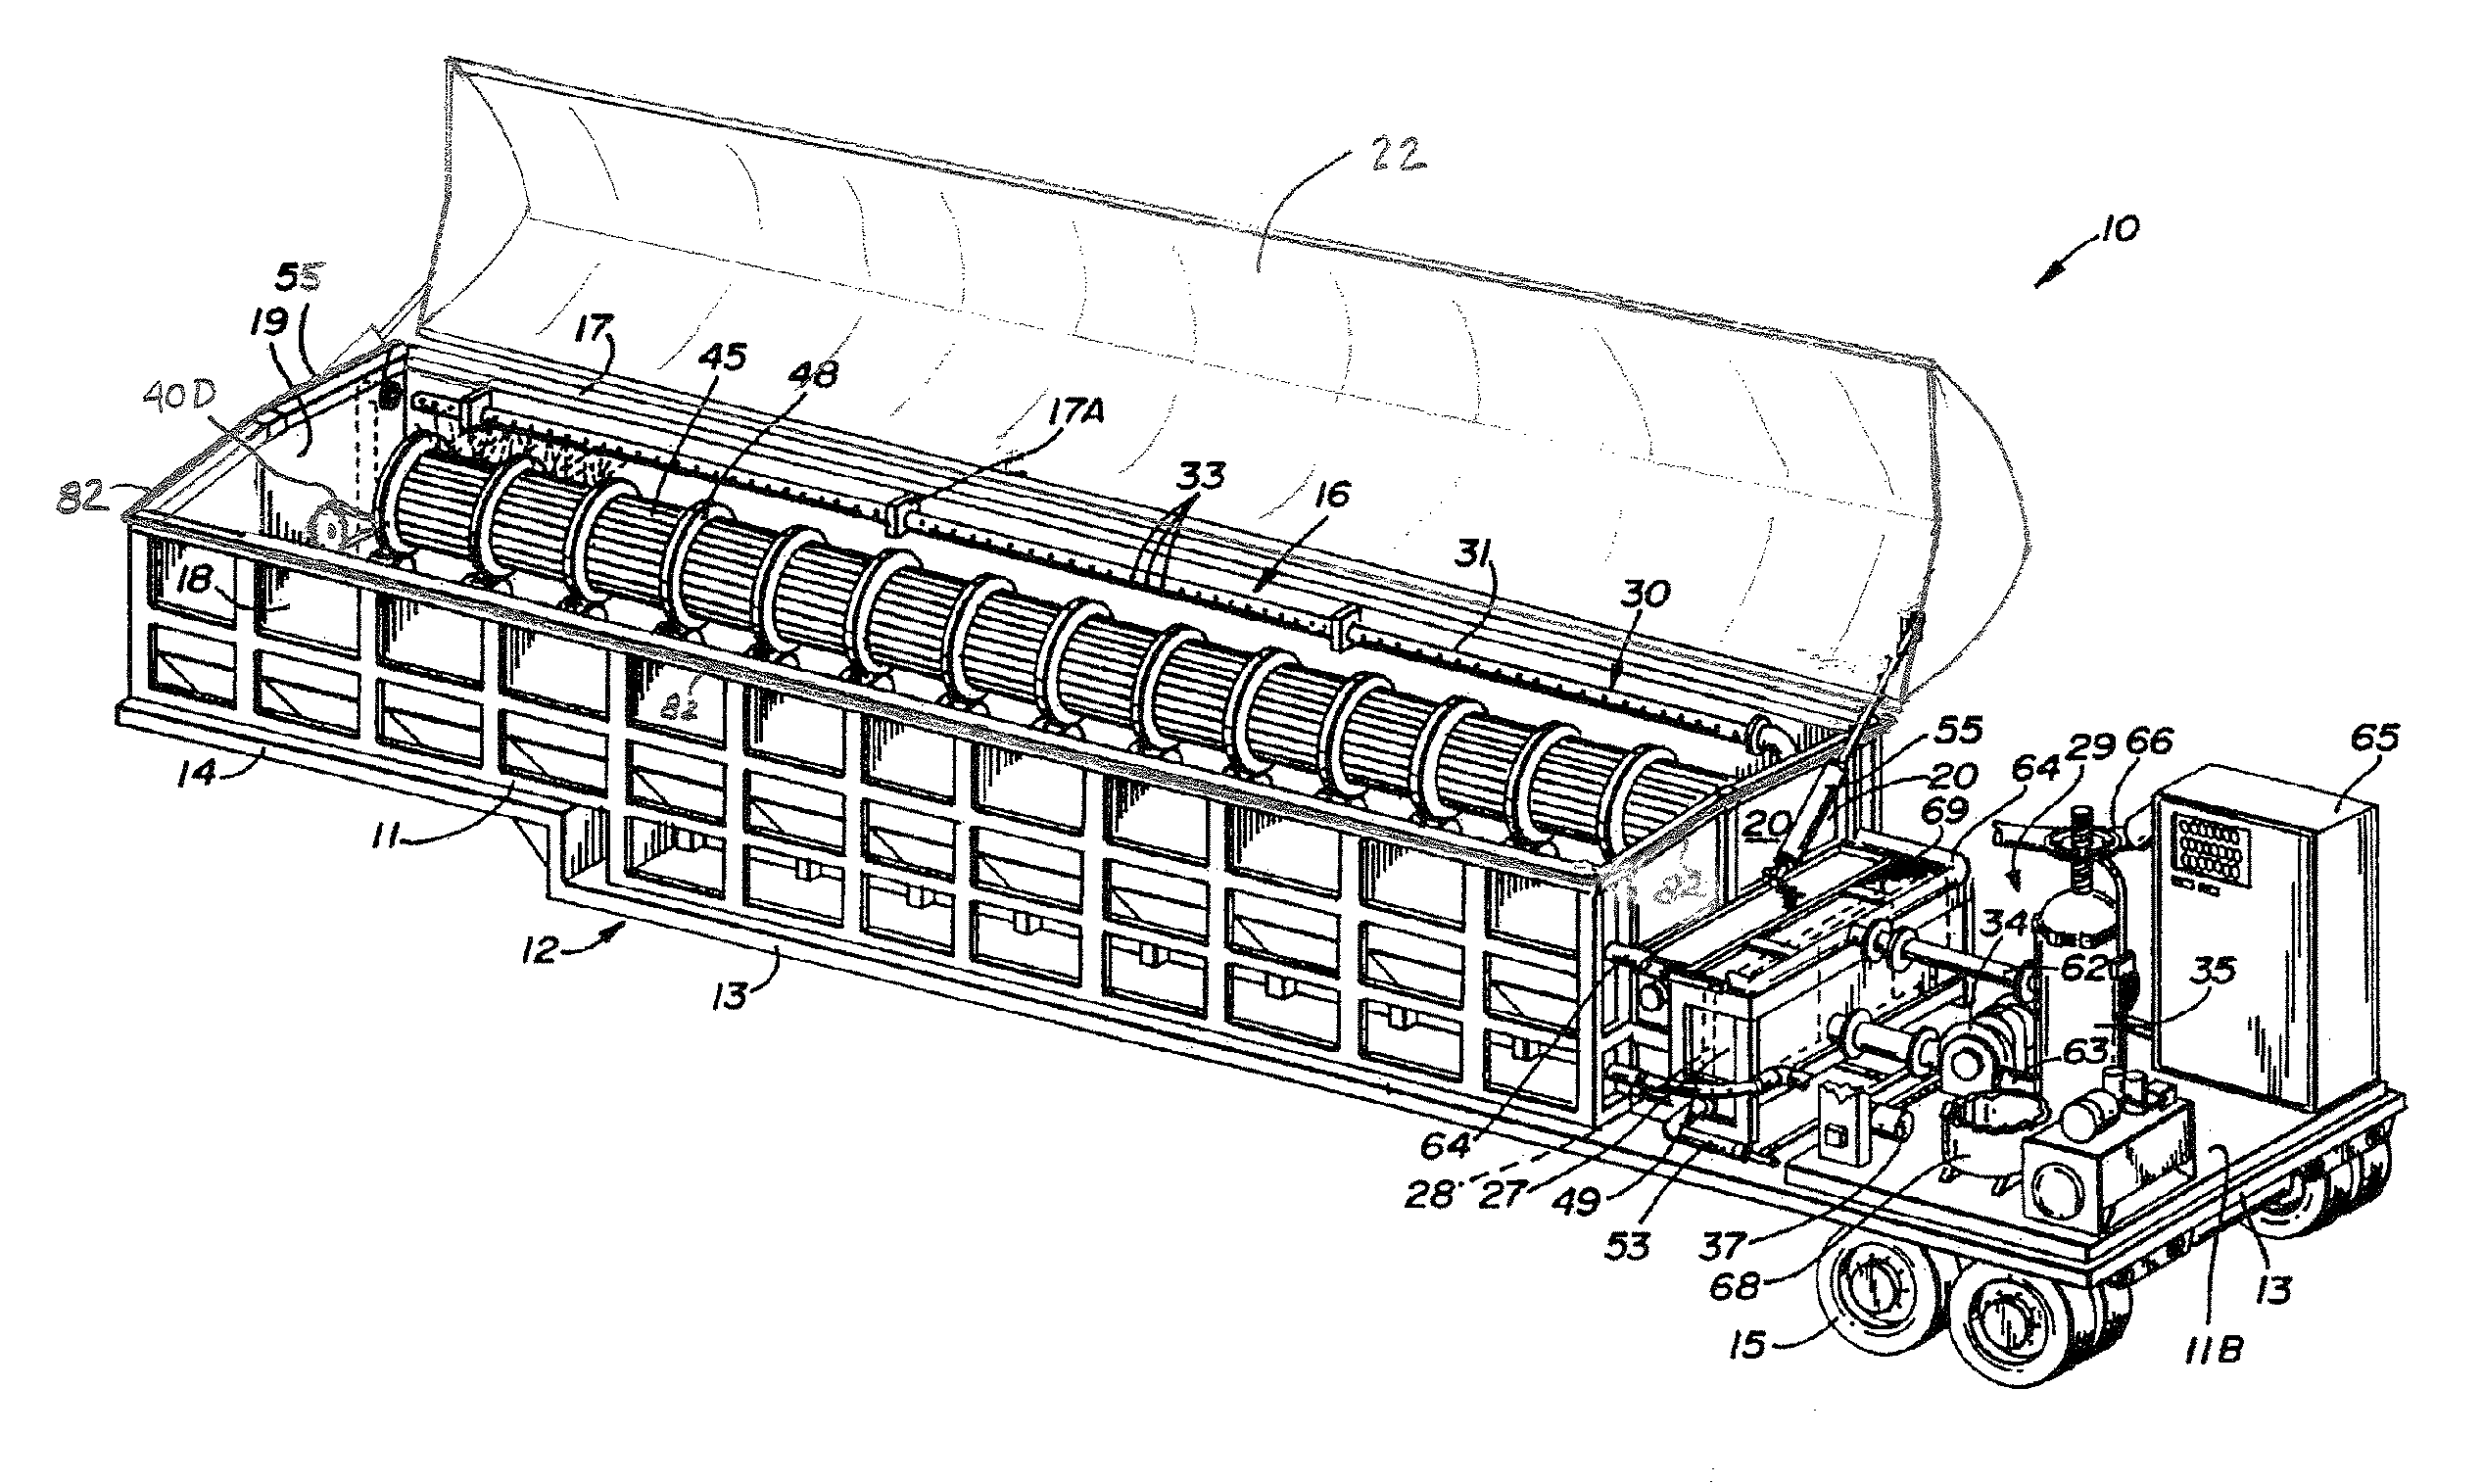 Method and system for cleaning heat exchanger tube bundles